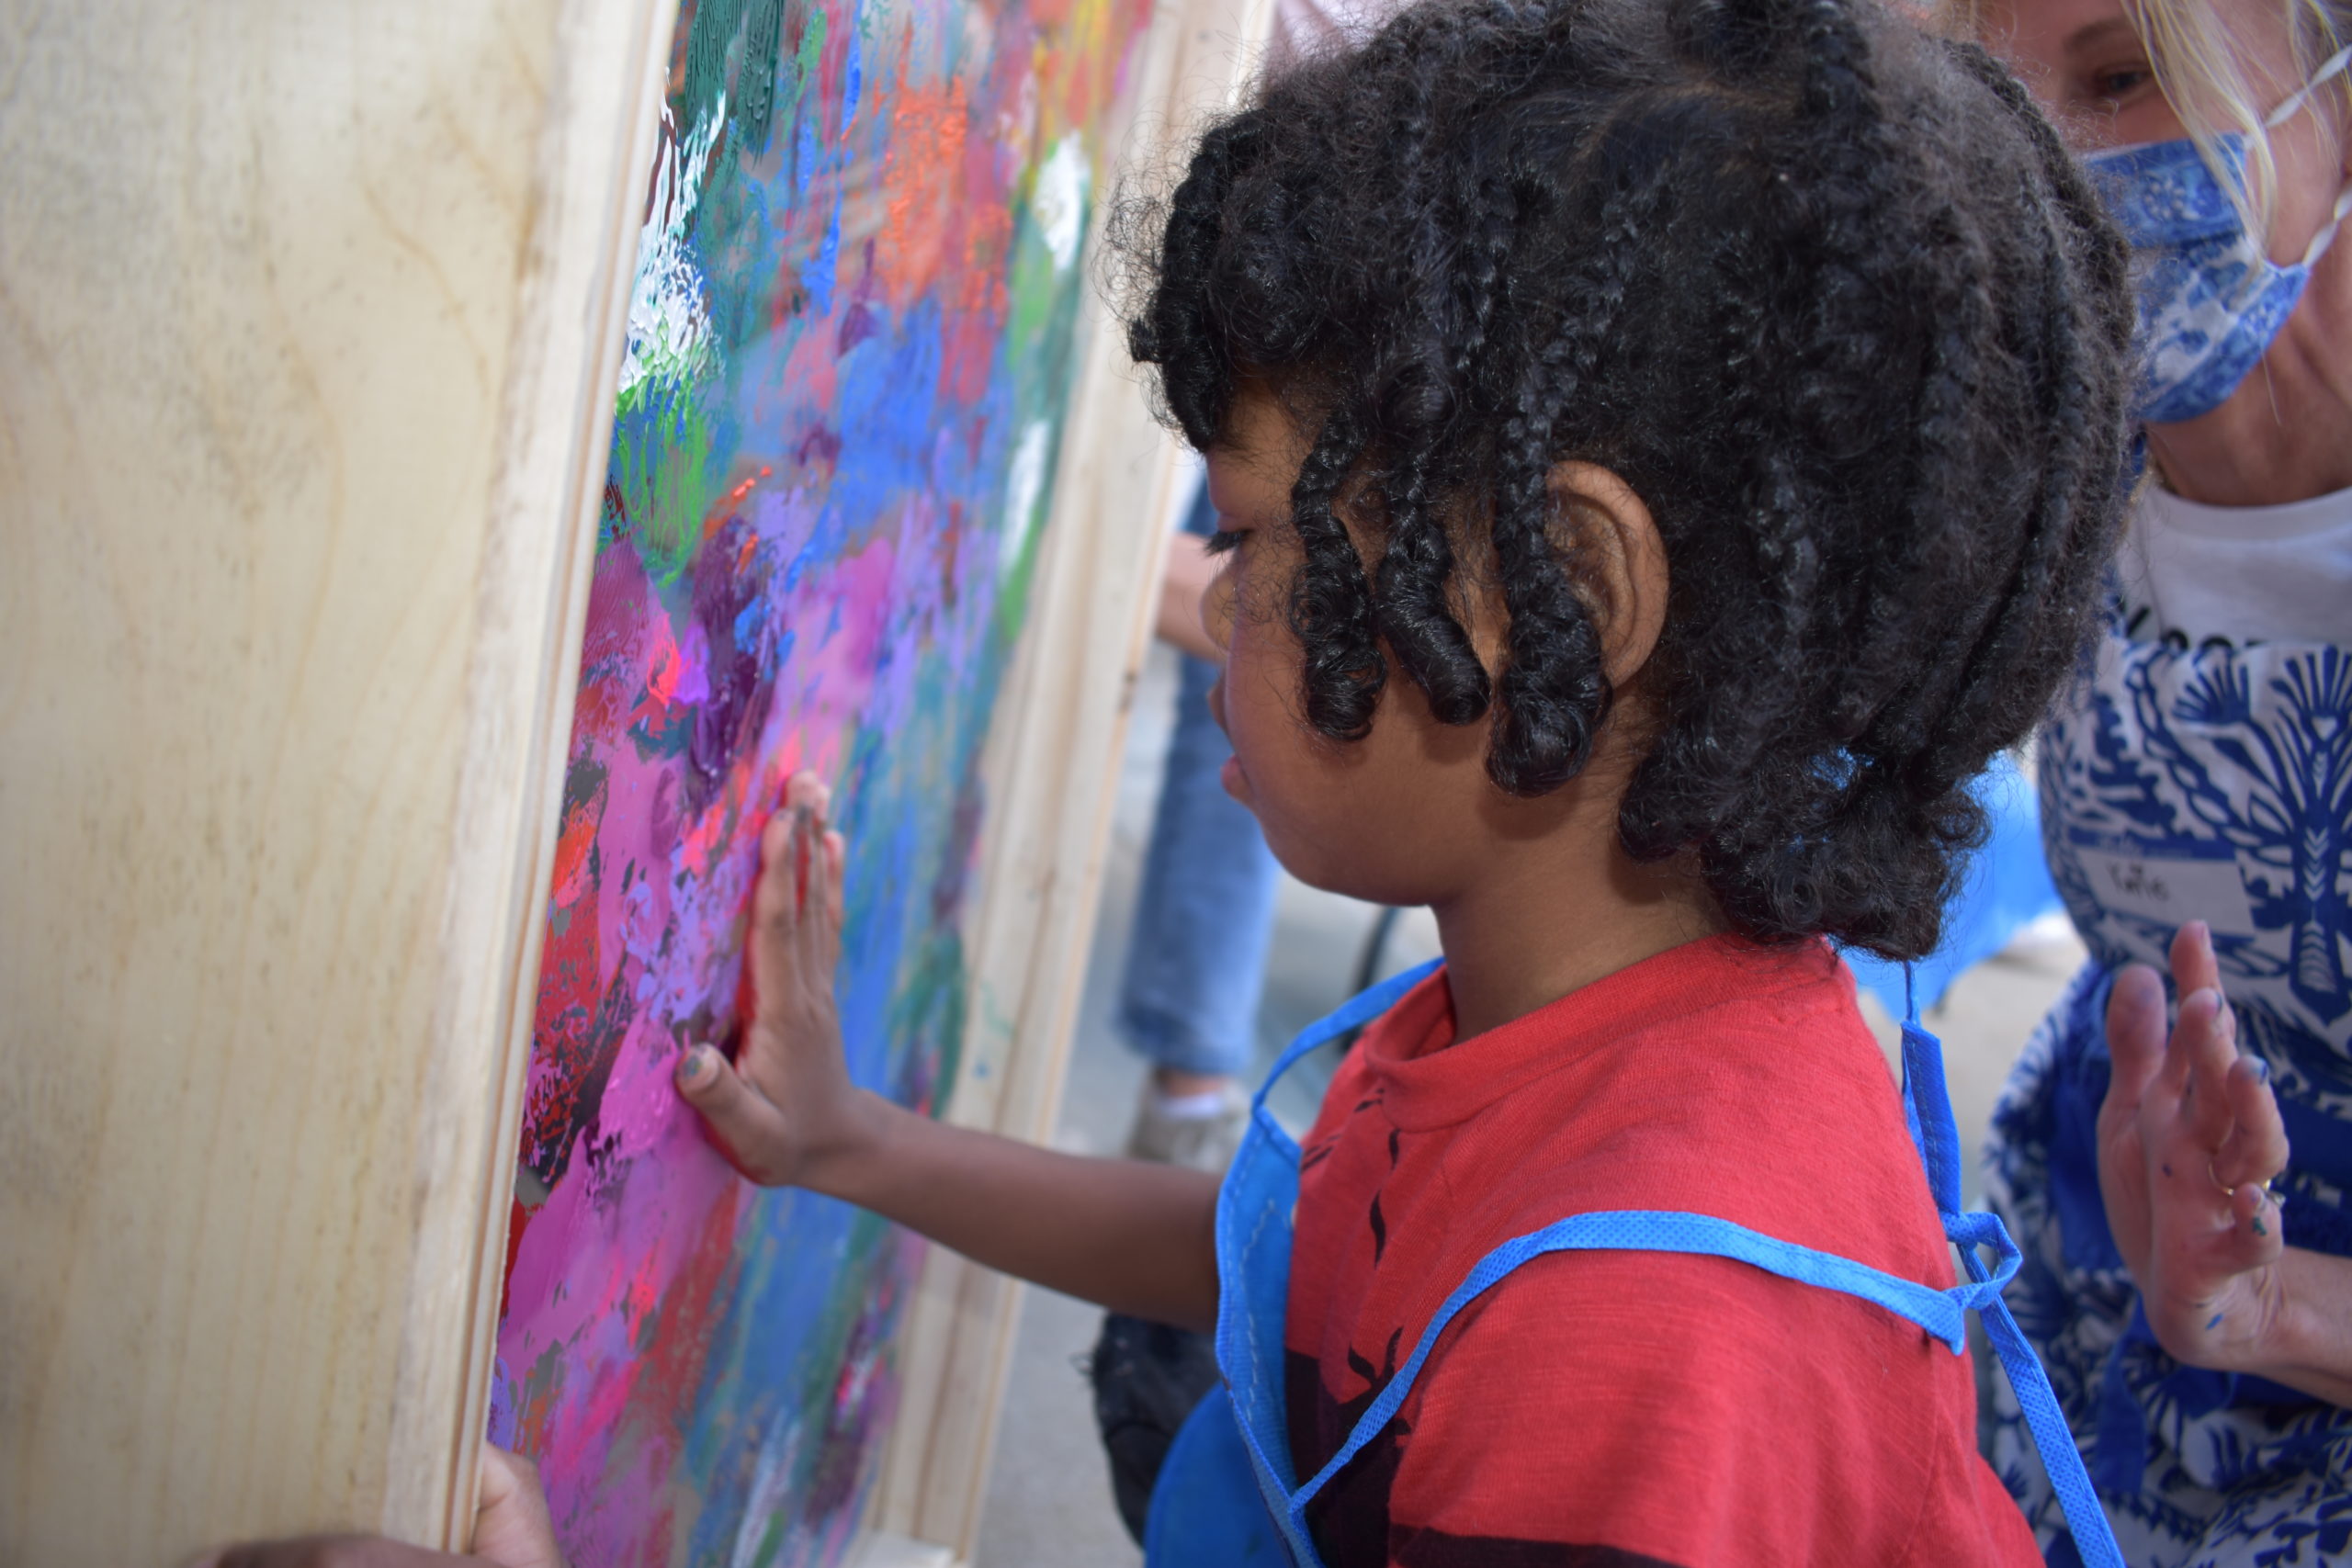 A child spreading paint with his hands